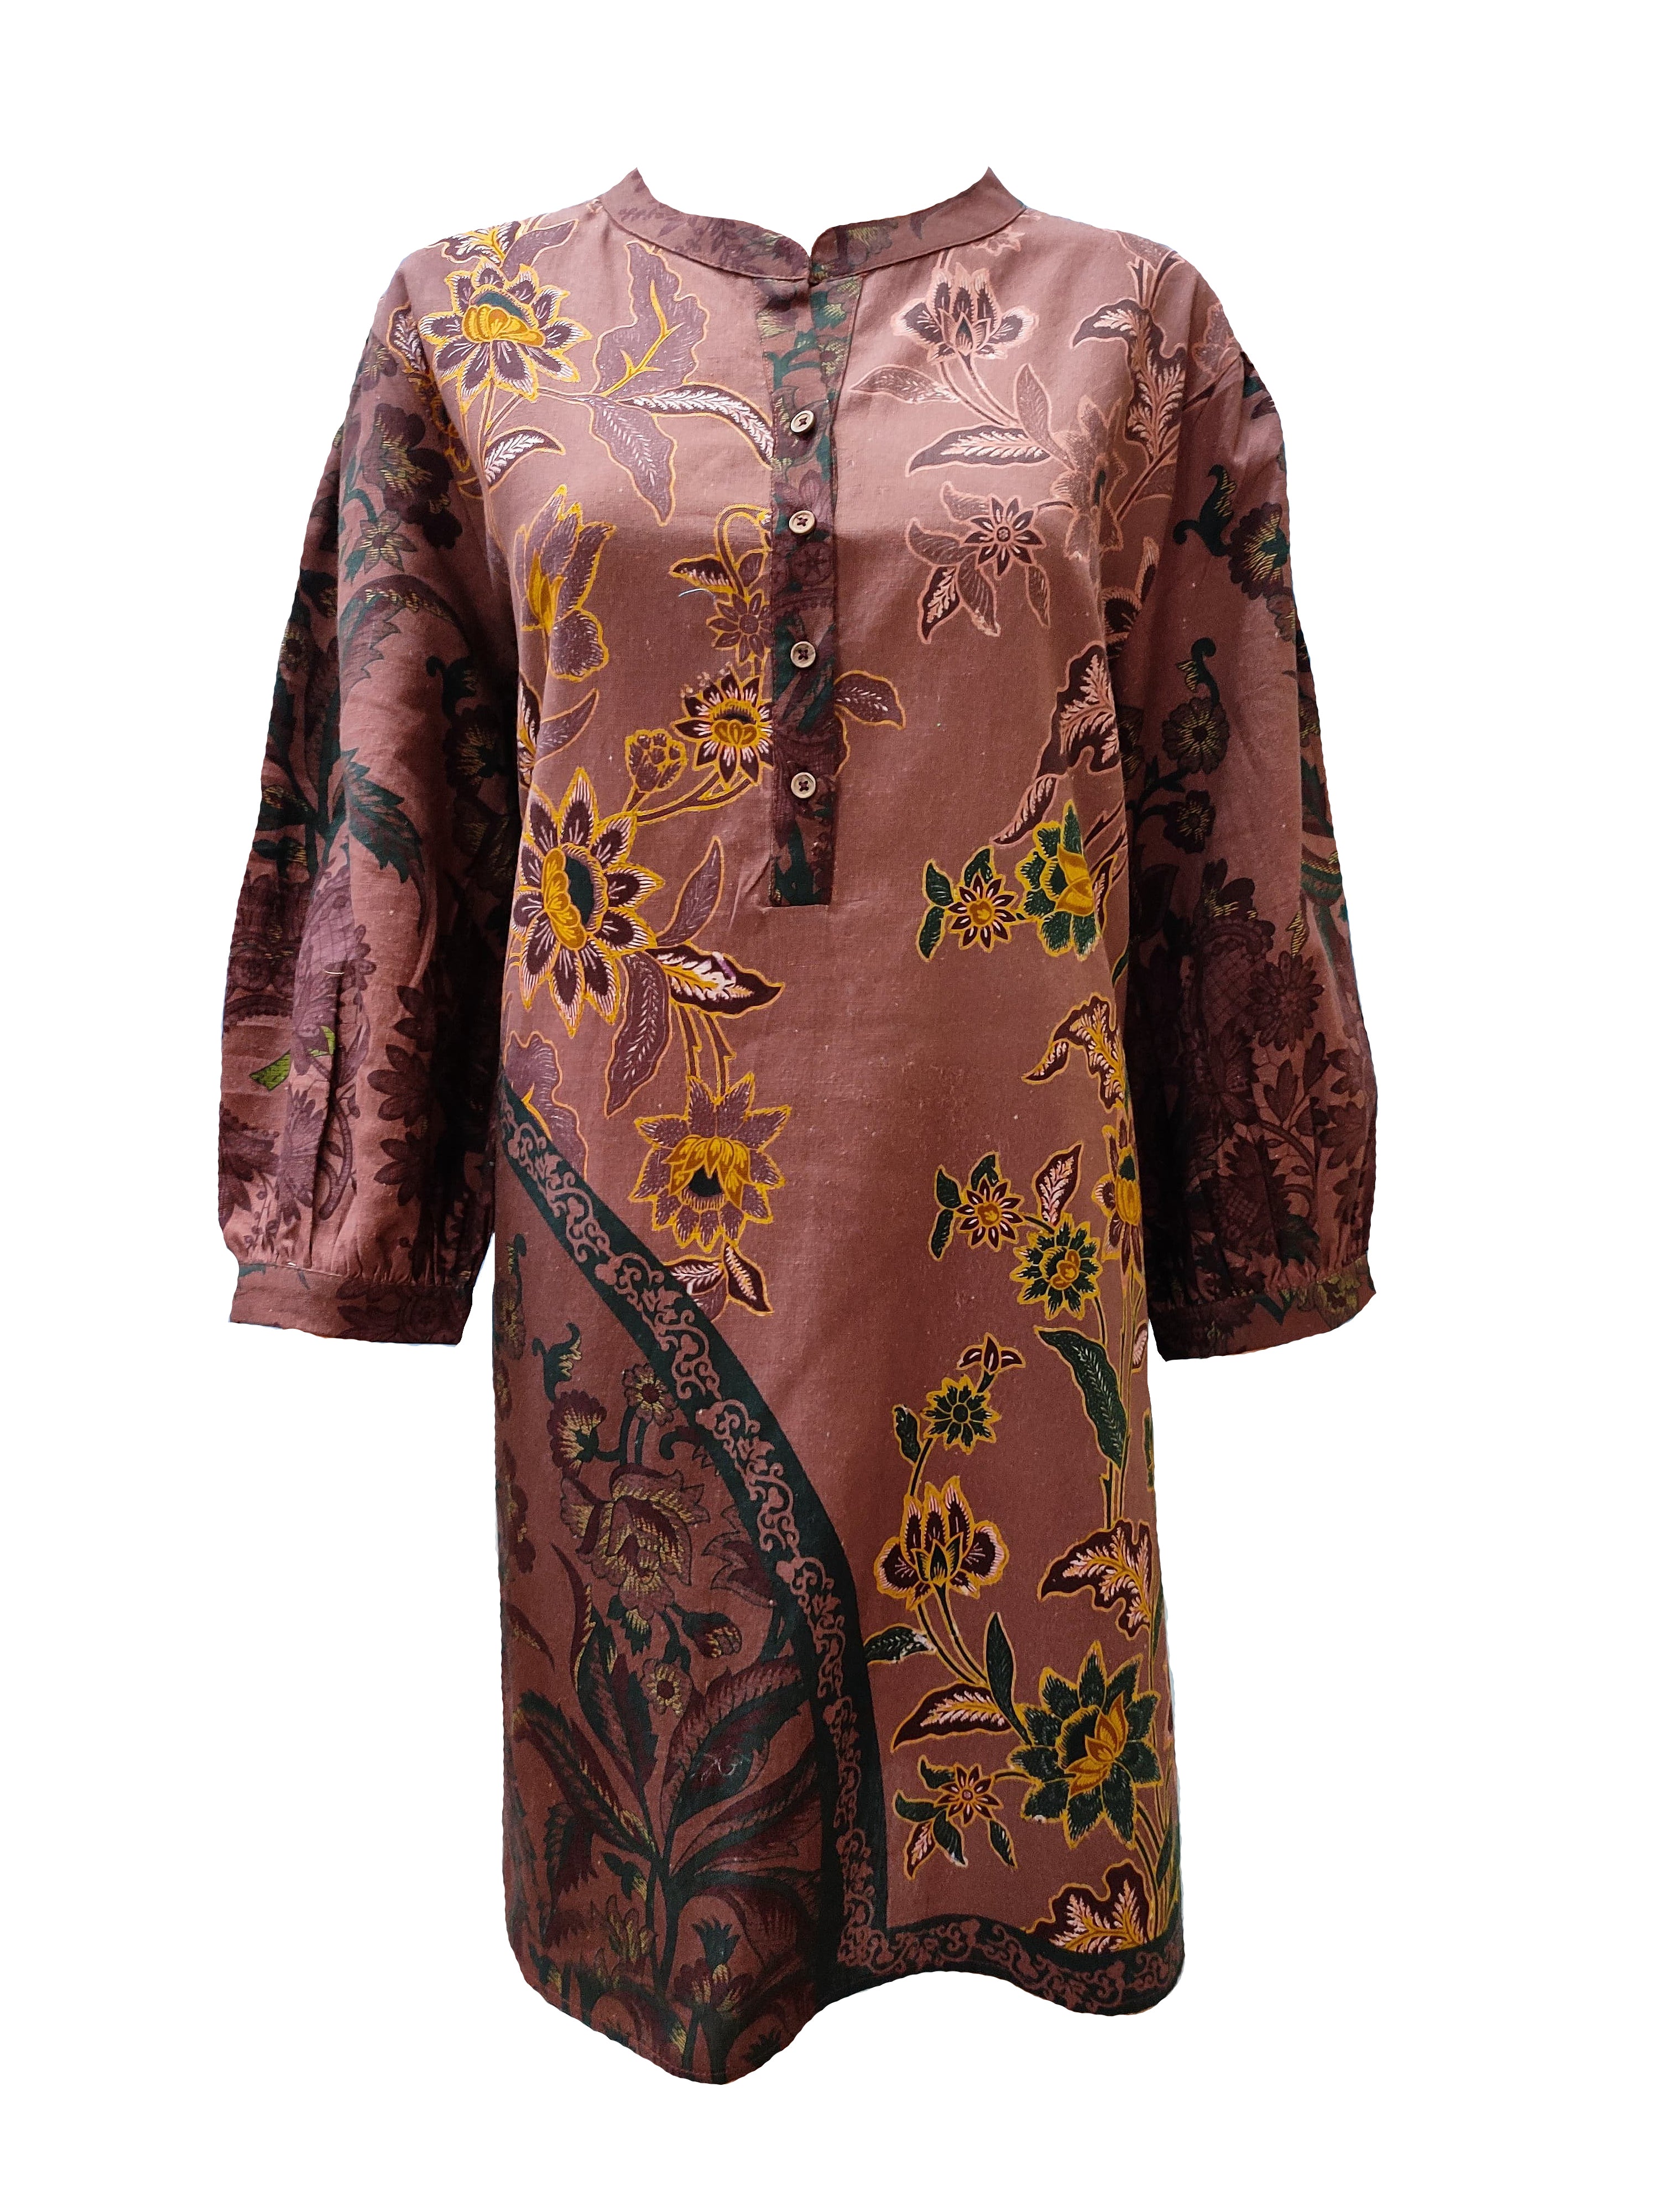 PRINTED VOILET TUNIC